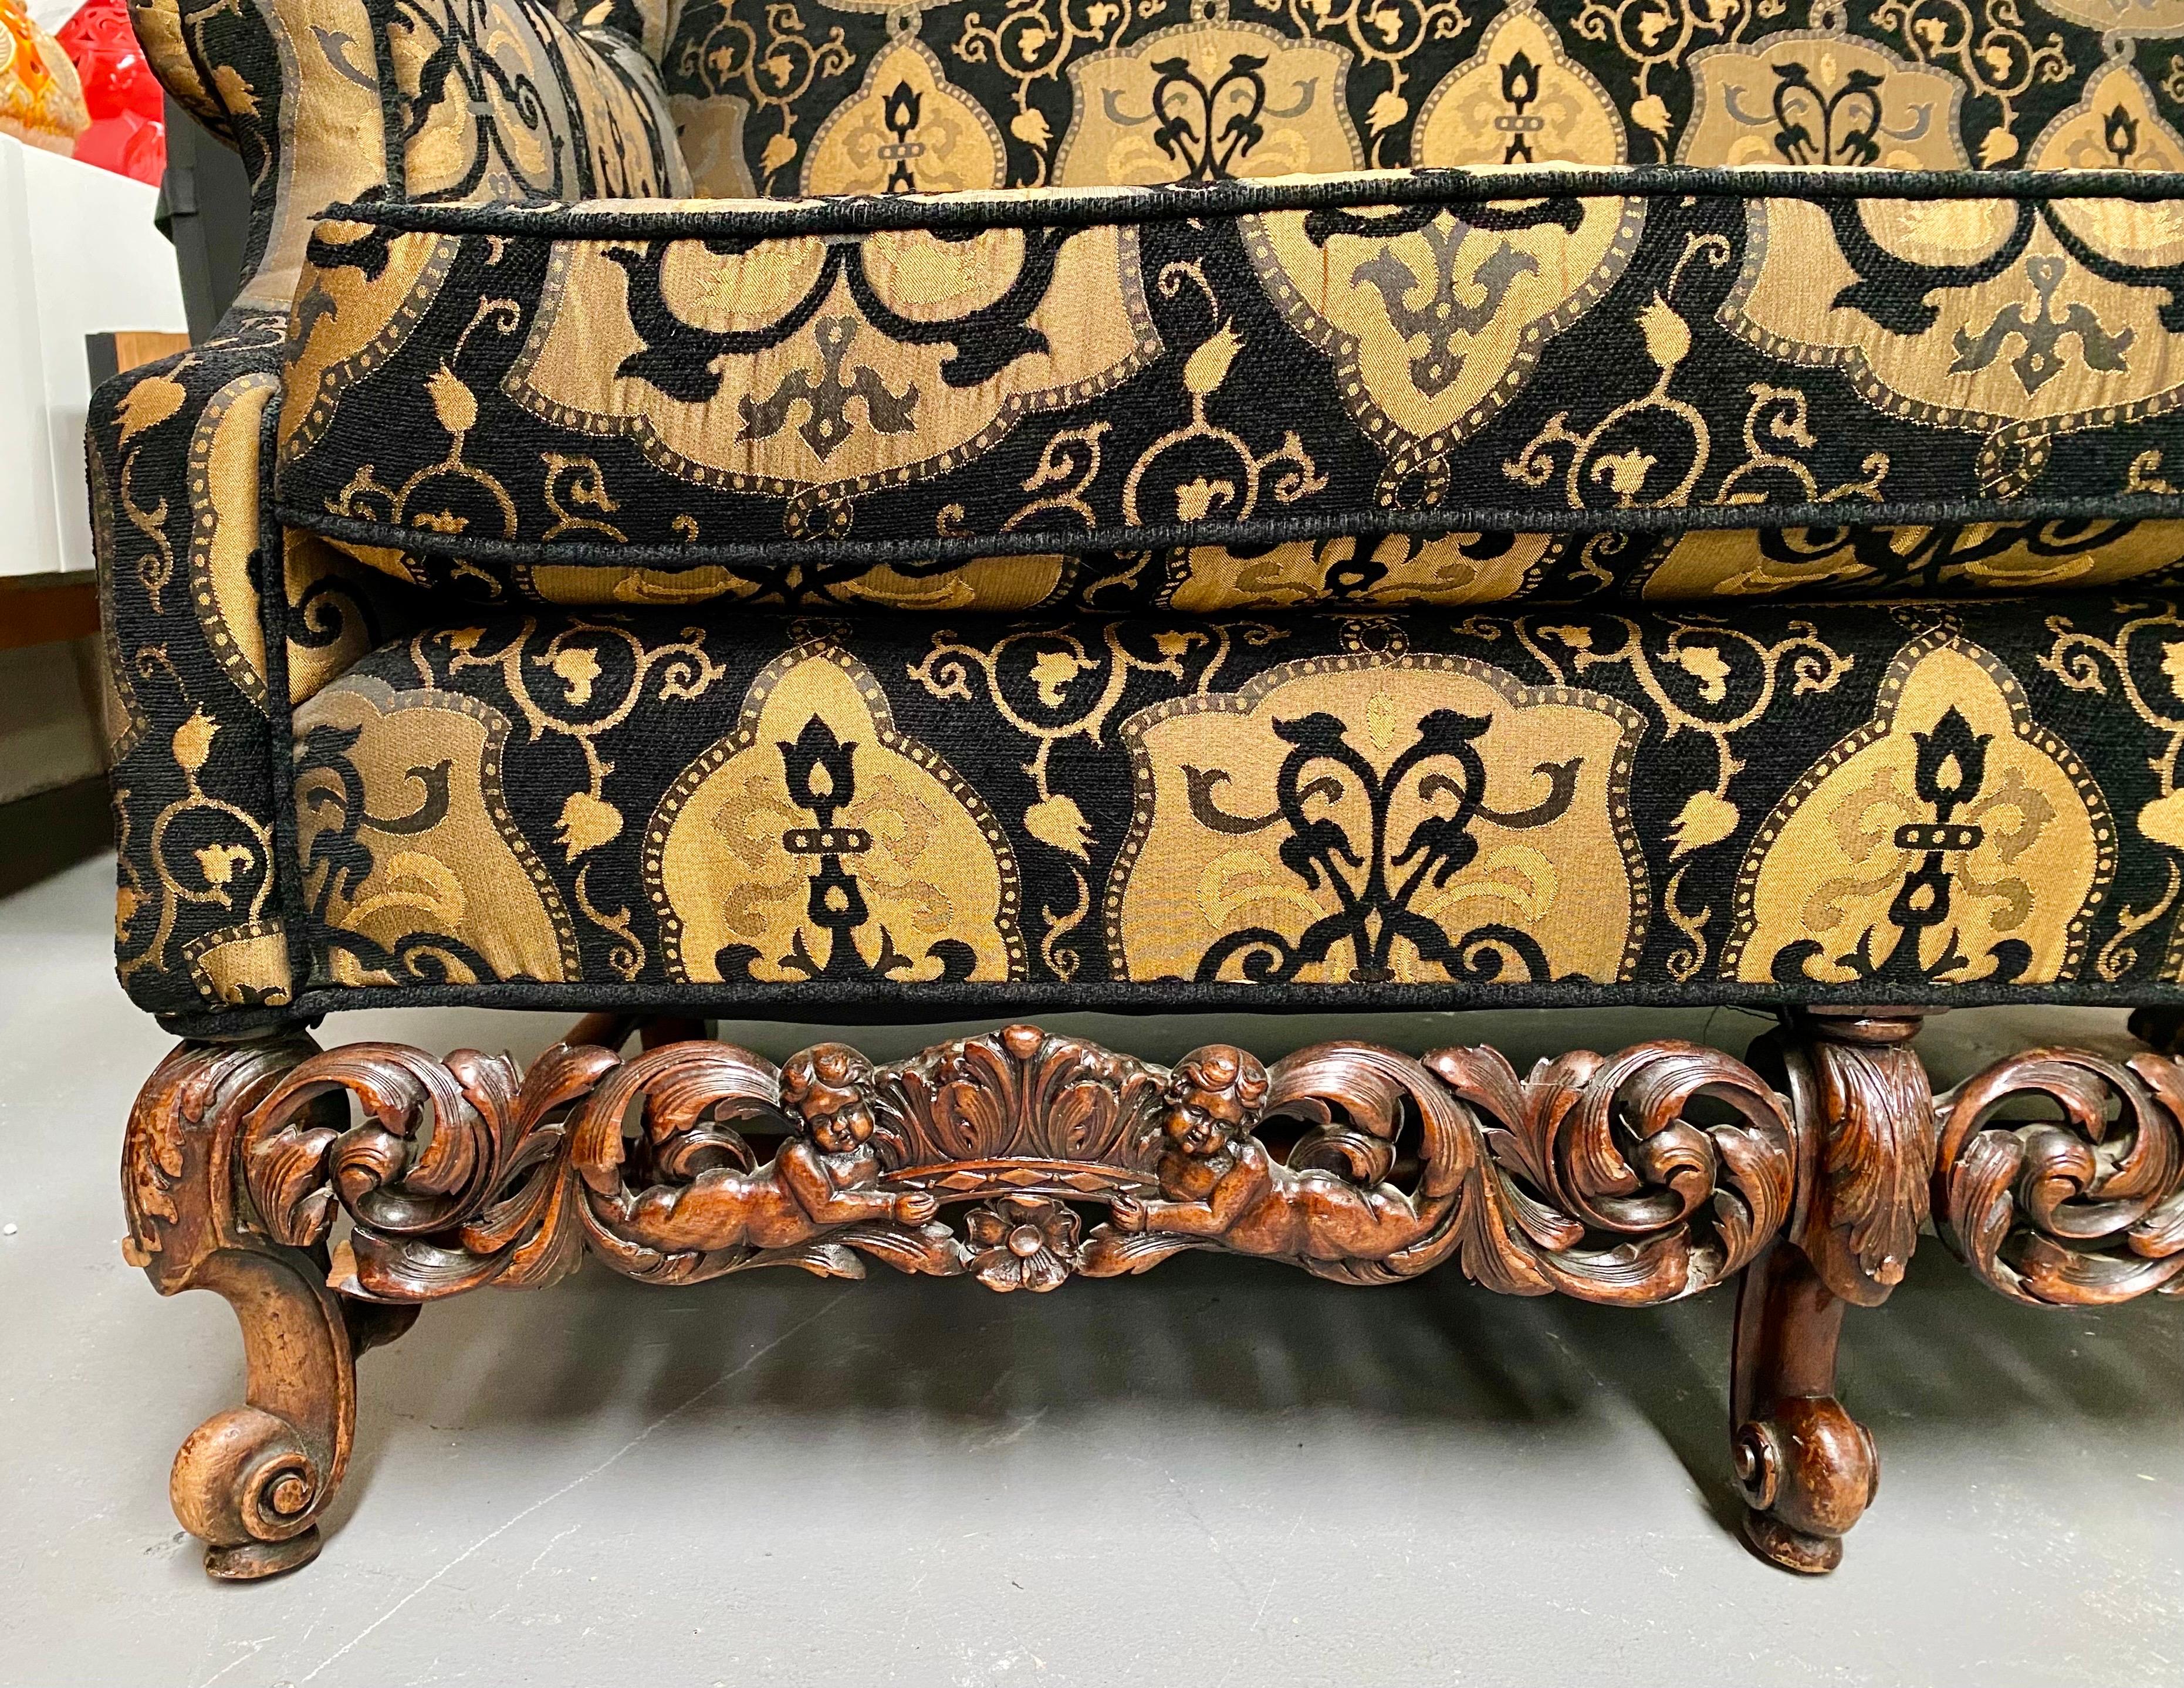 Italian Rococo Revival Style Settee or Sofa with Heraldic Motif in Black & Beige For Sale 1